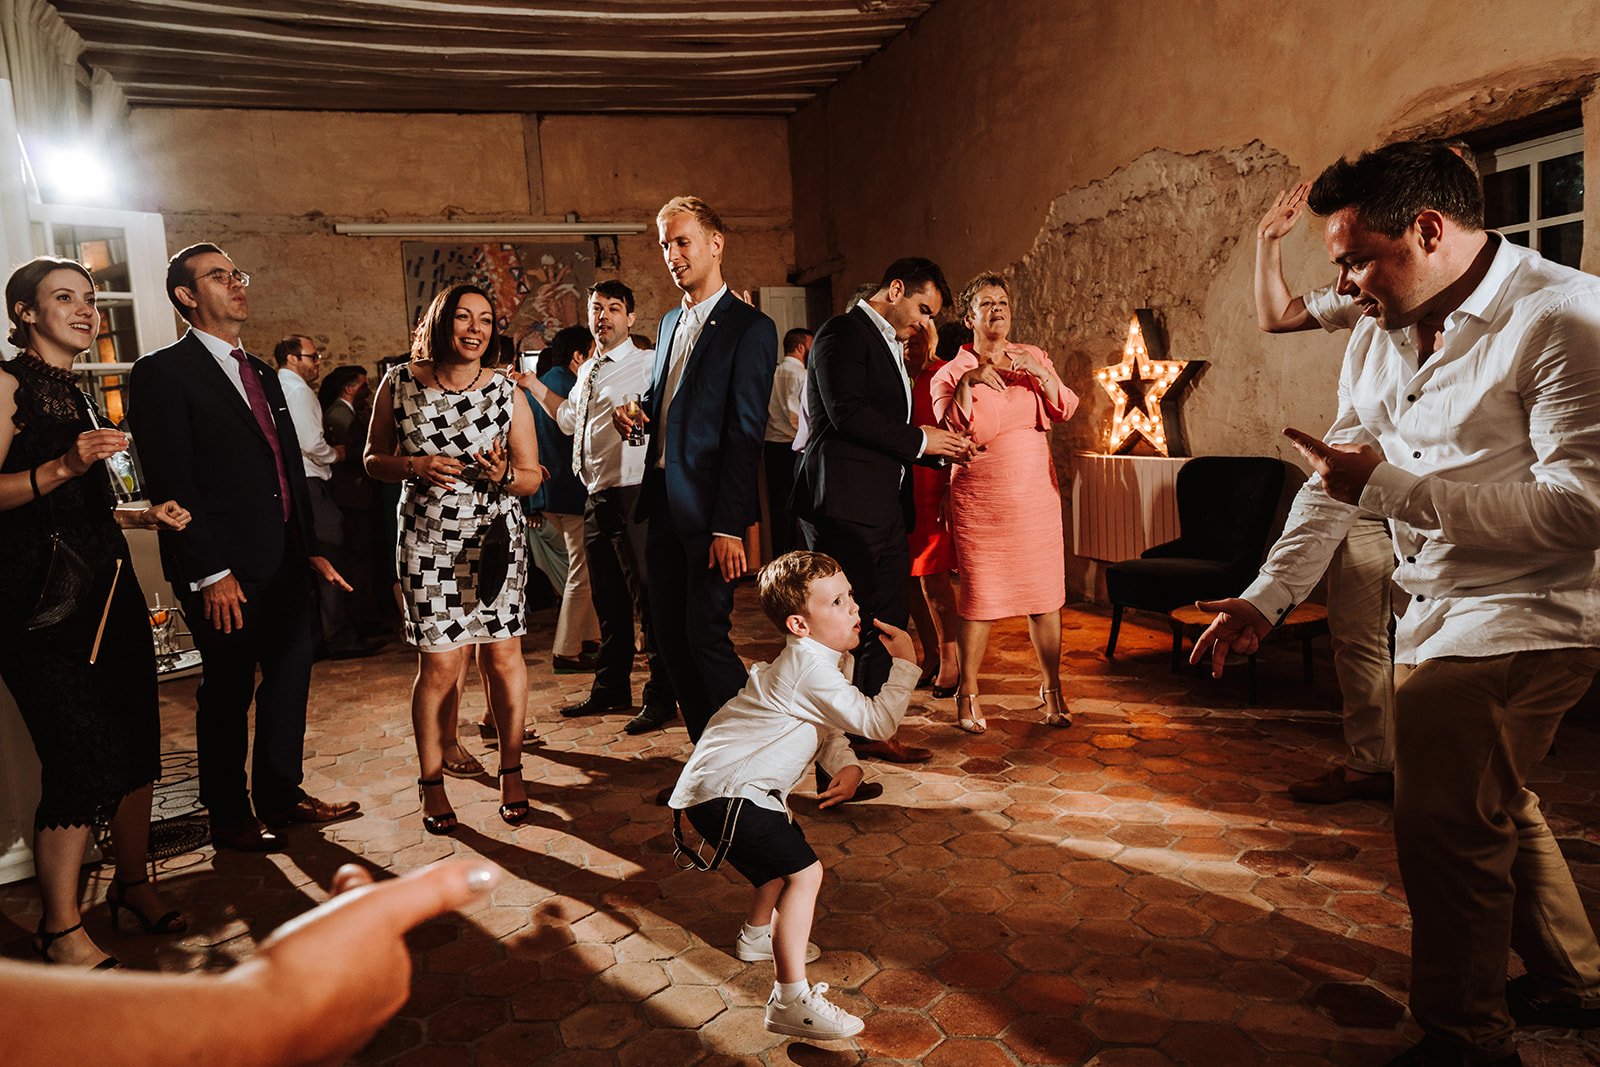 A little boy is dancing in the middle of a group of people during a chateau wedding  in France.